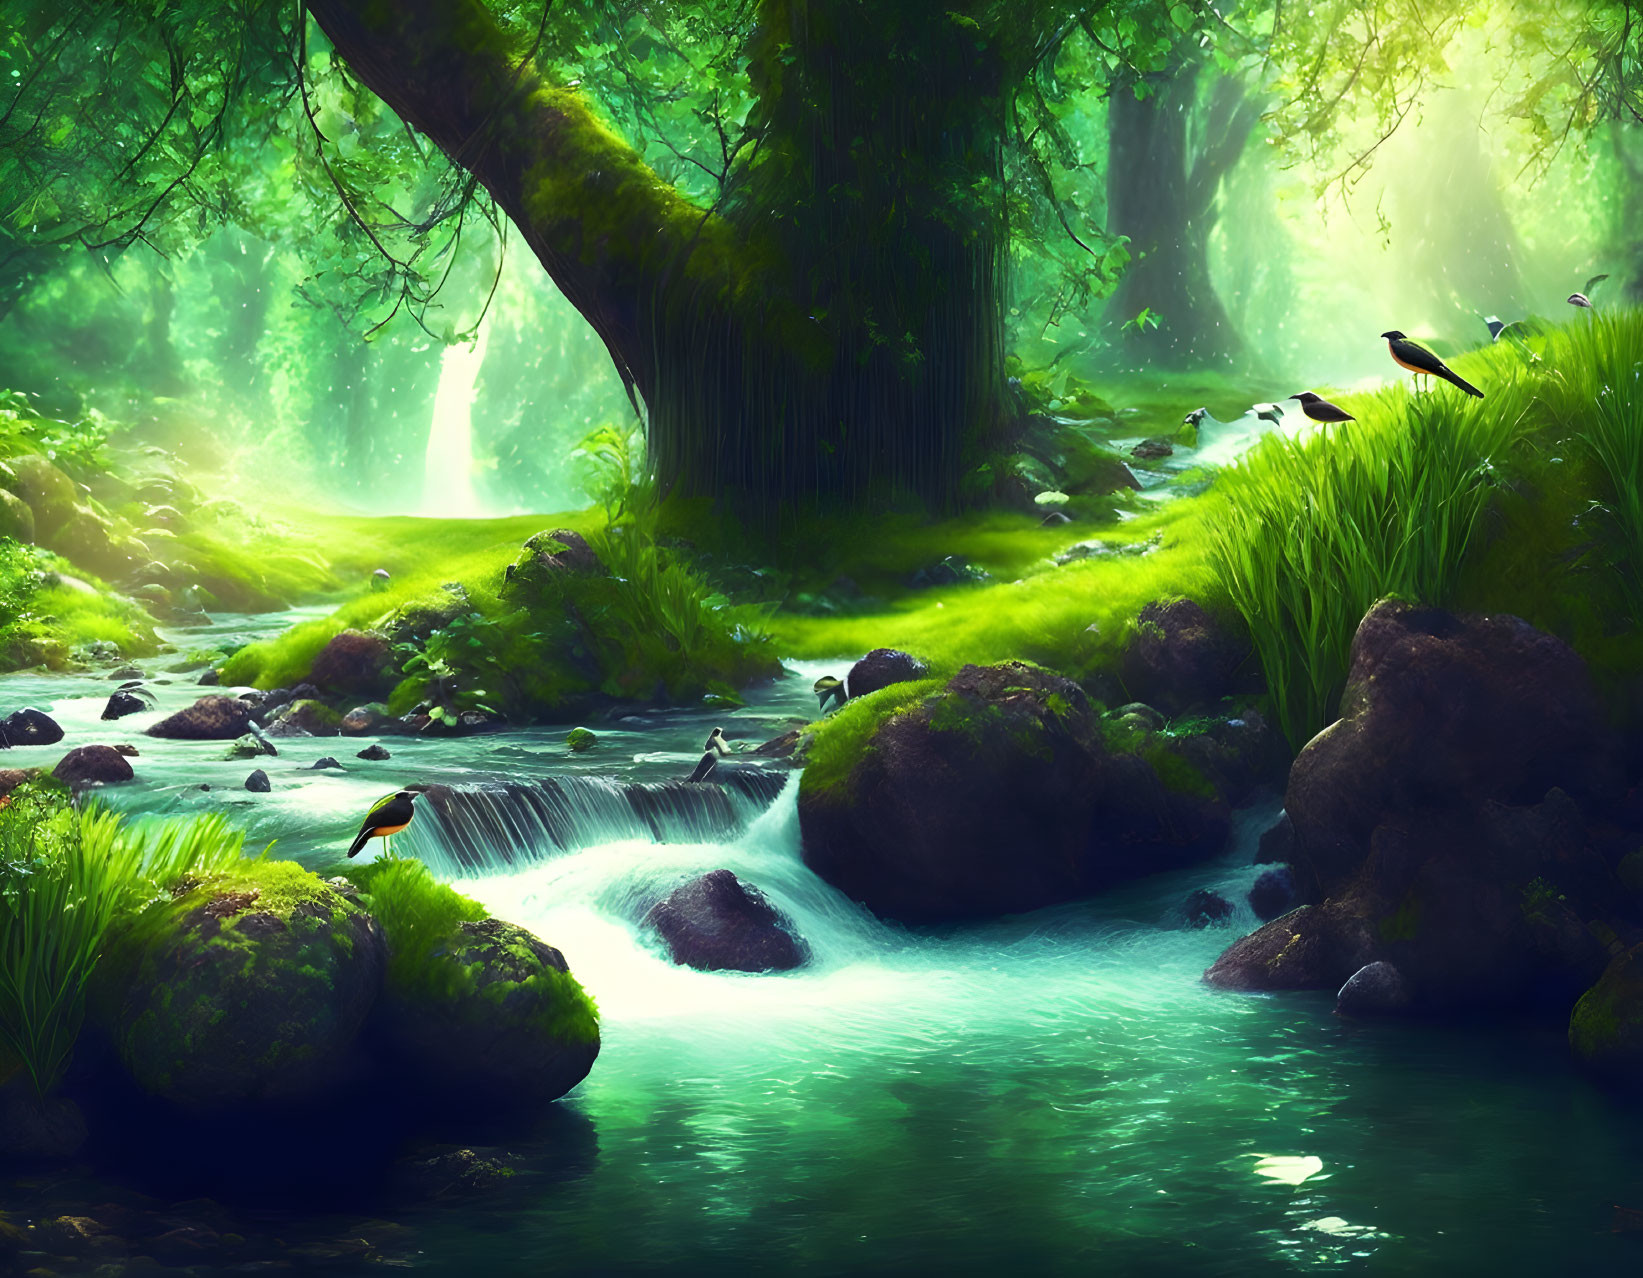 Tranquil forest stream with moss-covered rocks and birds